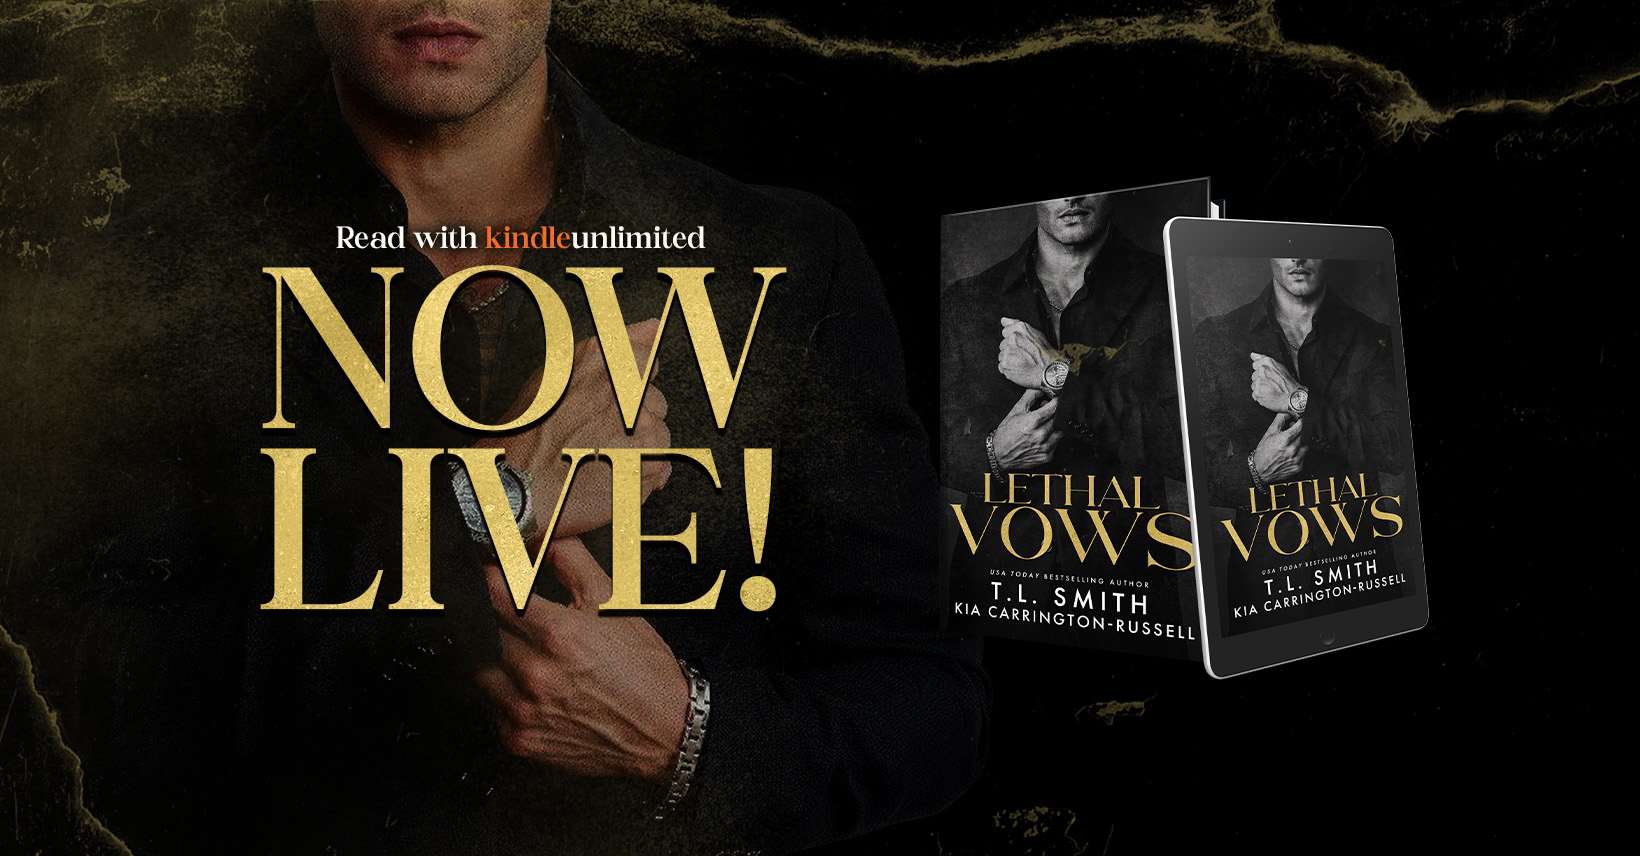 Lethal Vows  T.L. Smith - Special Edition - Dark Romance Books